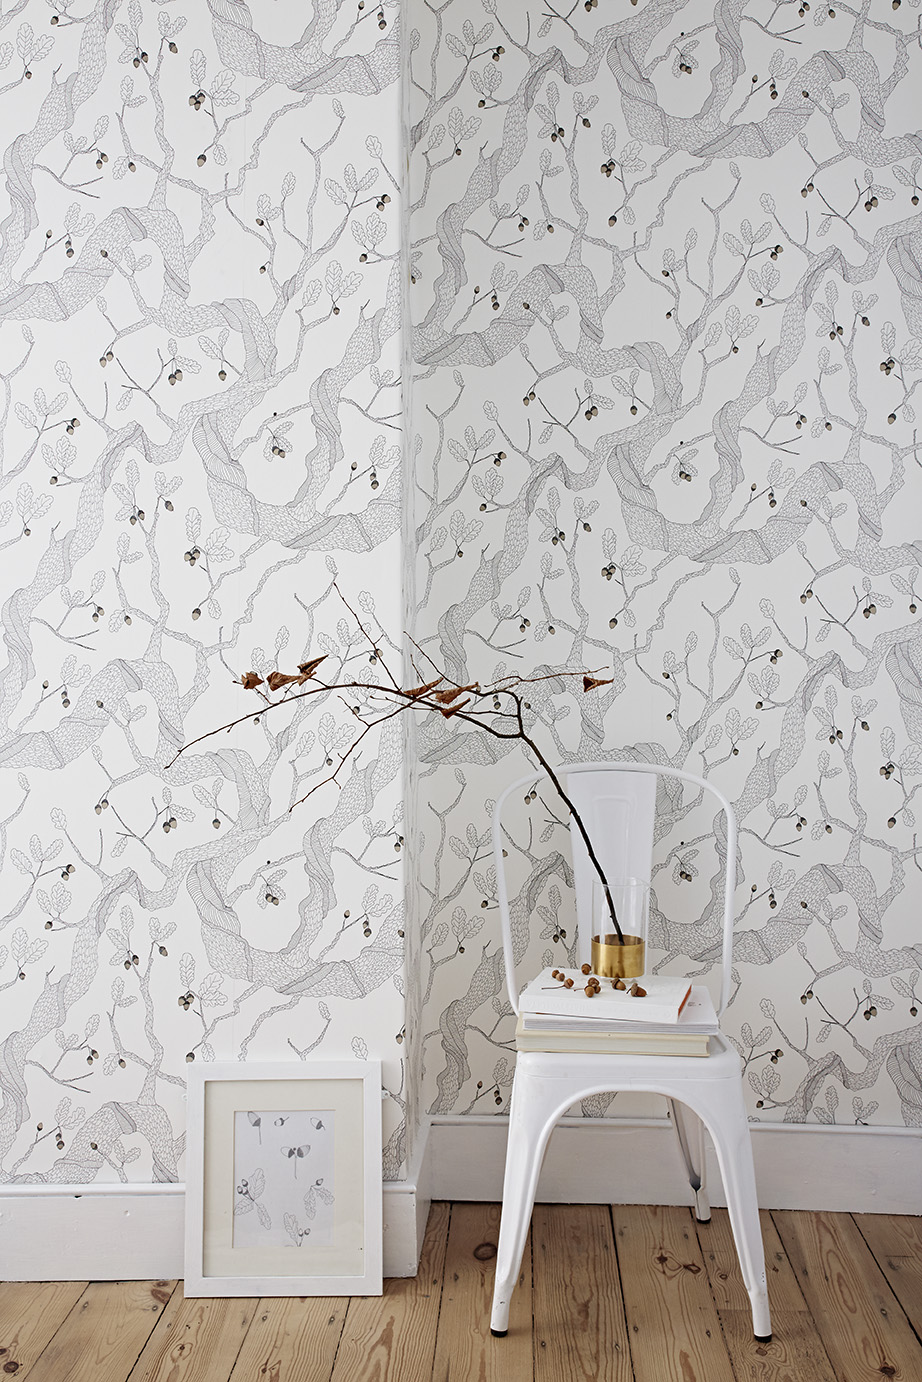 Oak tree white â abigail edwards hand drawn wallpapers fabrics and accessories